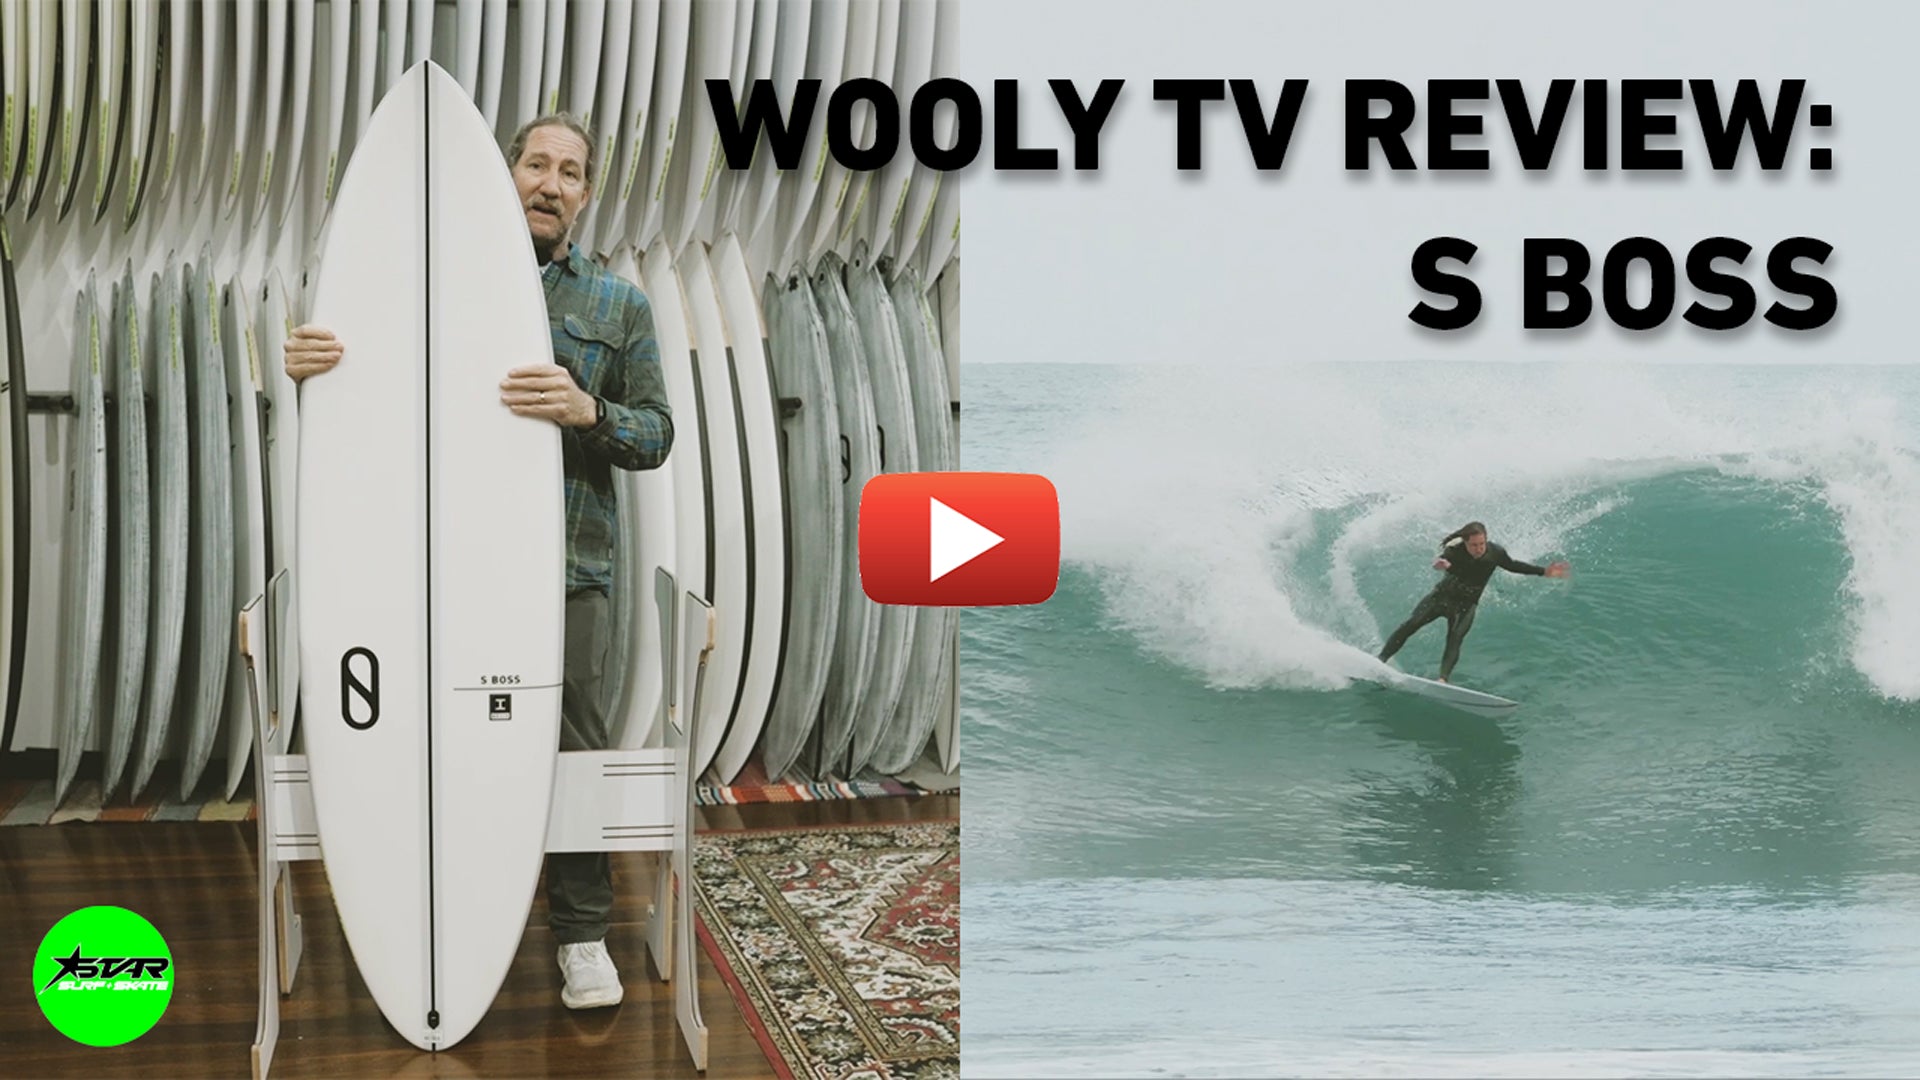 Star Surf & Wooly TV Review: S Boss